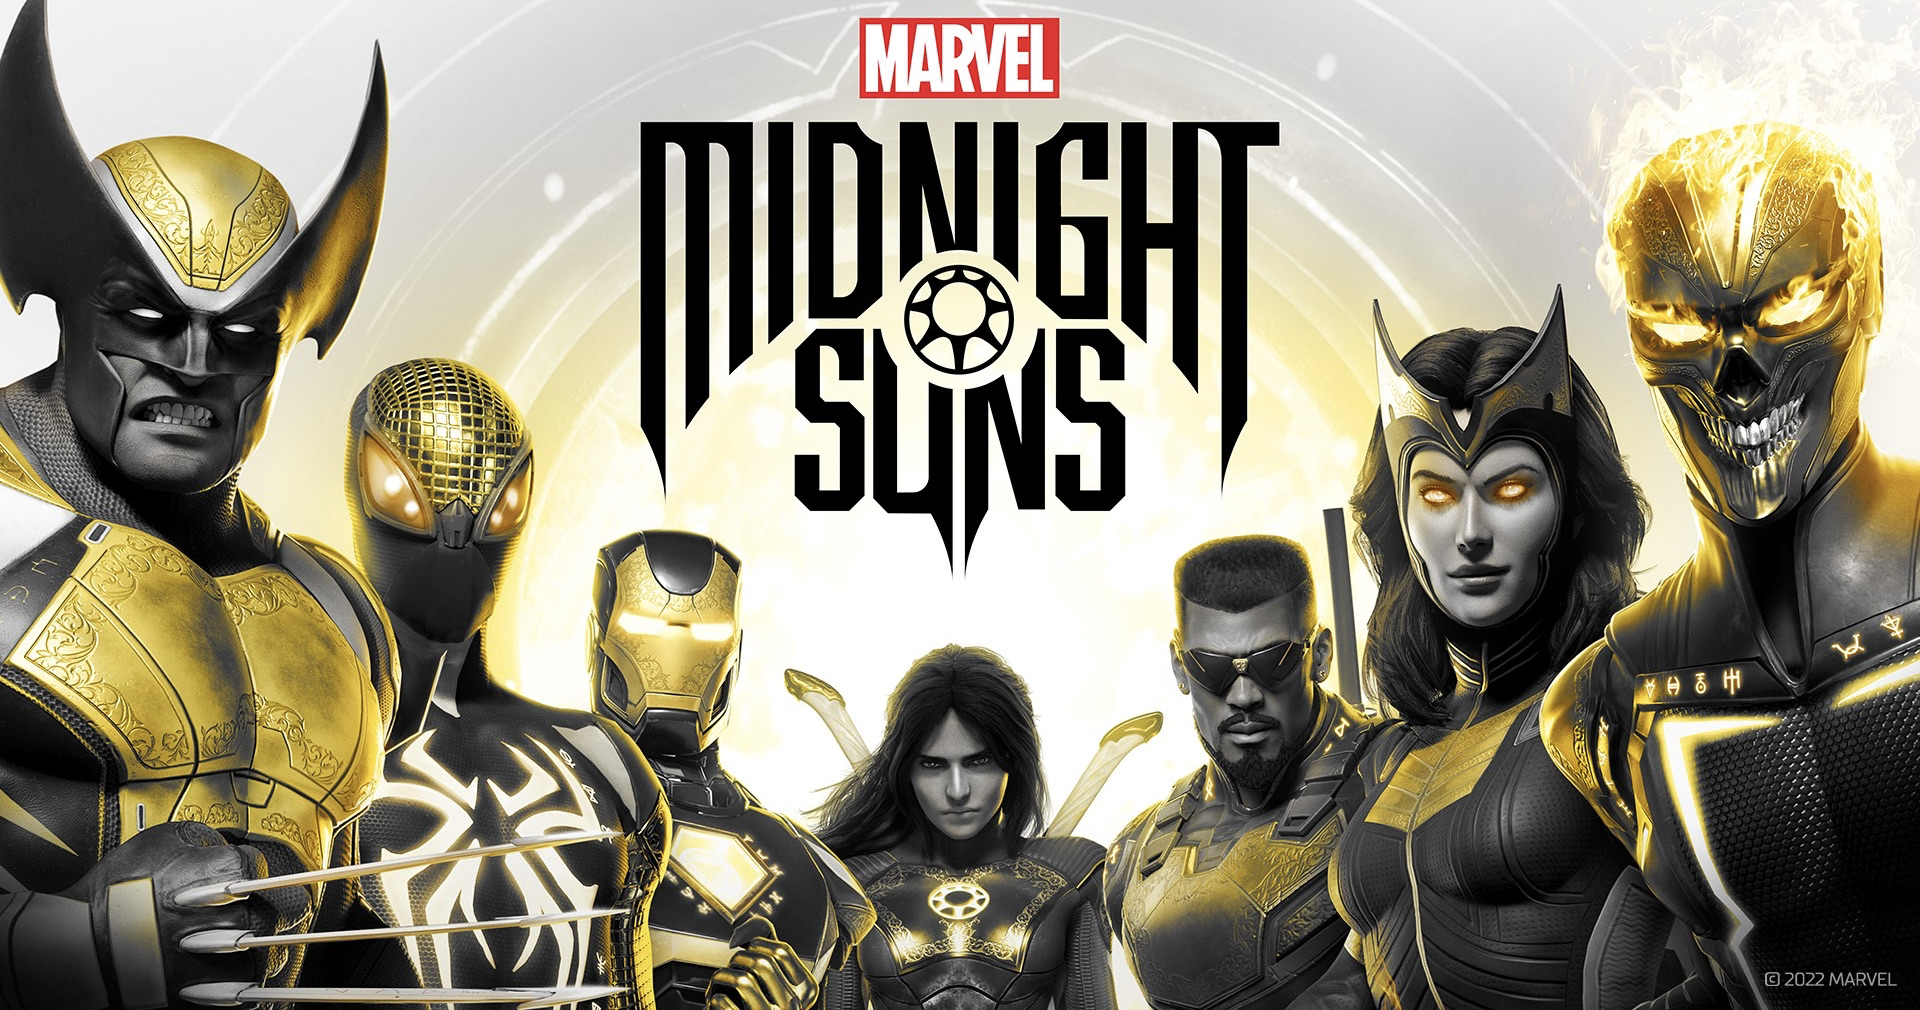 Marvel's Midnight Suns DLC will include new superheroes and cosmetics